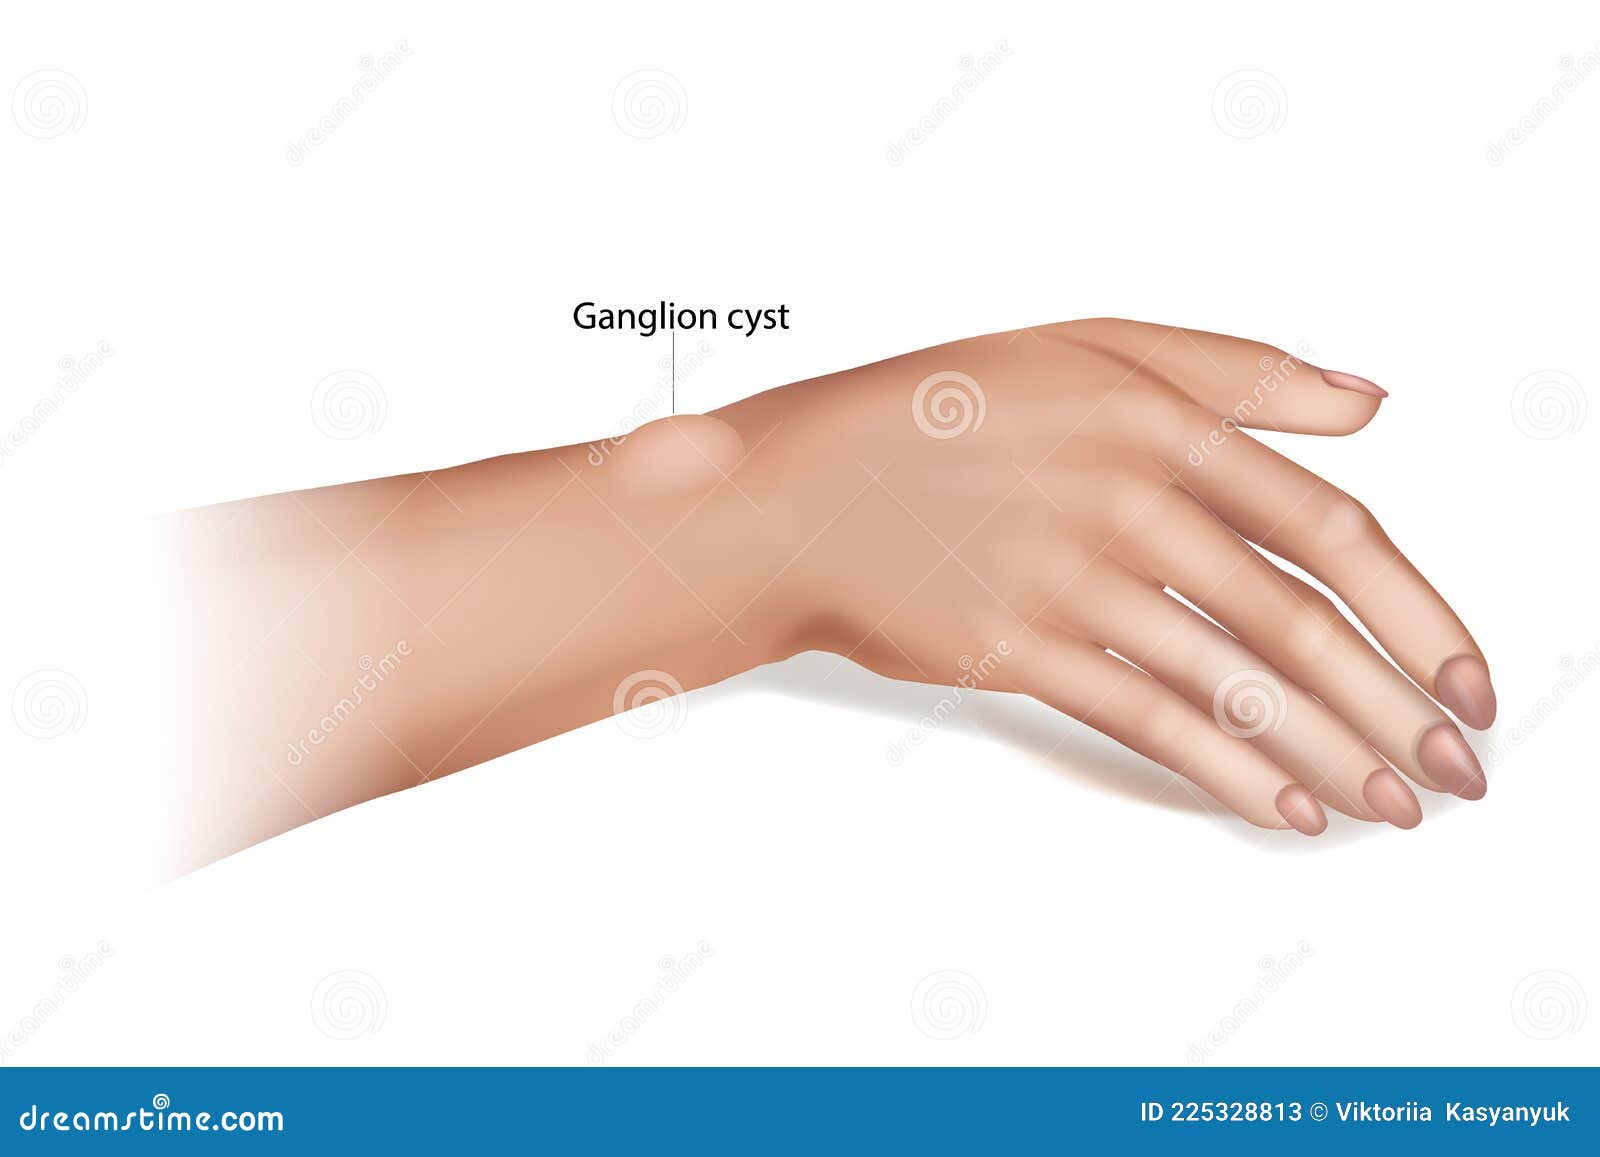 ganglion cyst of the wrist and hand. synovial cyst or a gideon`s disease, or a bible cyst, or a bible bump